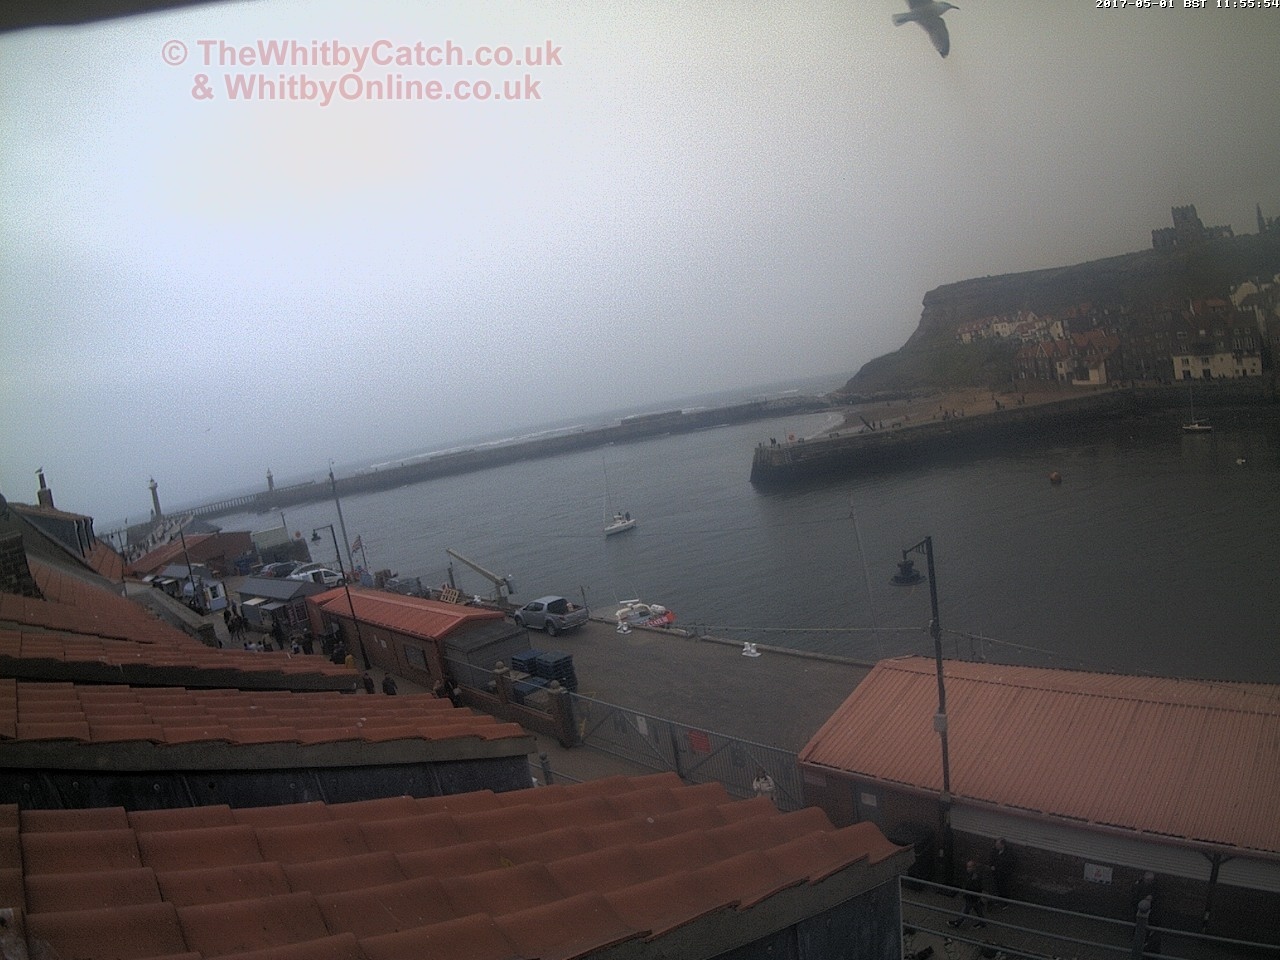 Whitby Mon 1st May 2017 11:56.